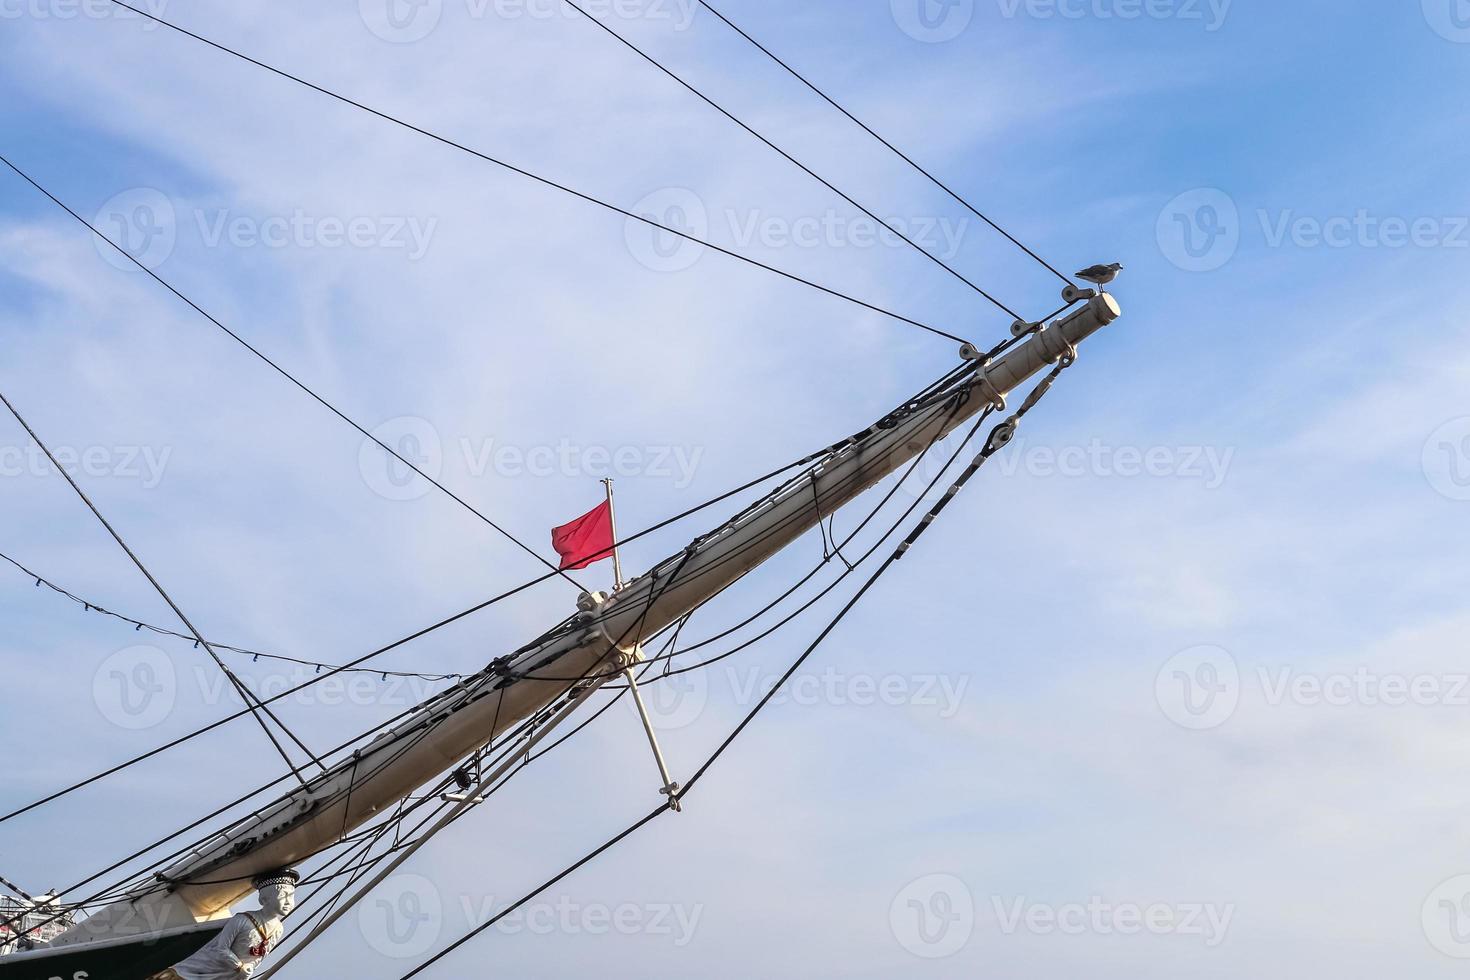 Sailing ship mast against the blue sky on some sailing boats with rigging details. photo